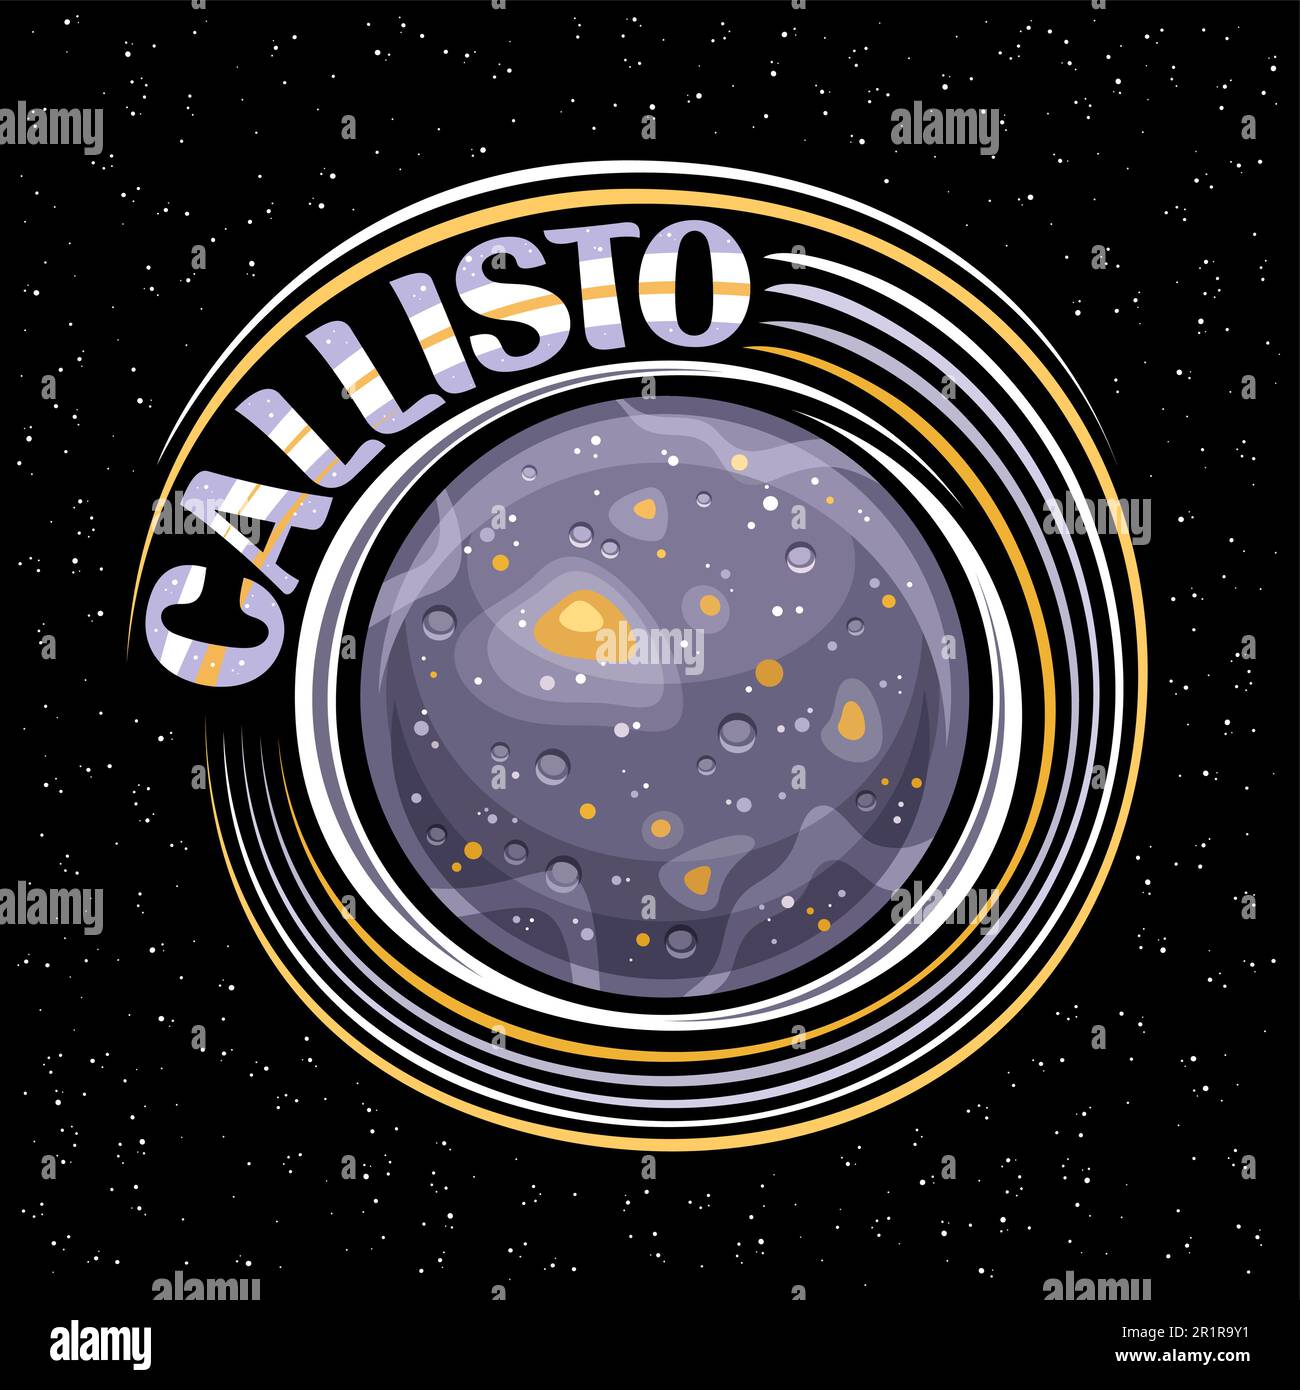 Vector logo for Callisto, decorative fantasy print with rotating moon callisto, stone surface with craters and mountains, cosmo badge with unique lett Stock Vector